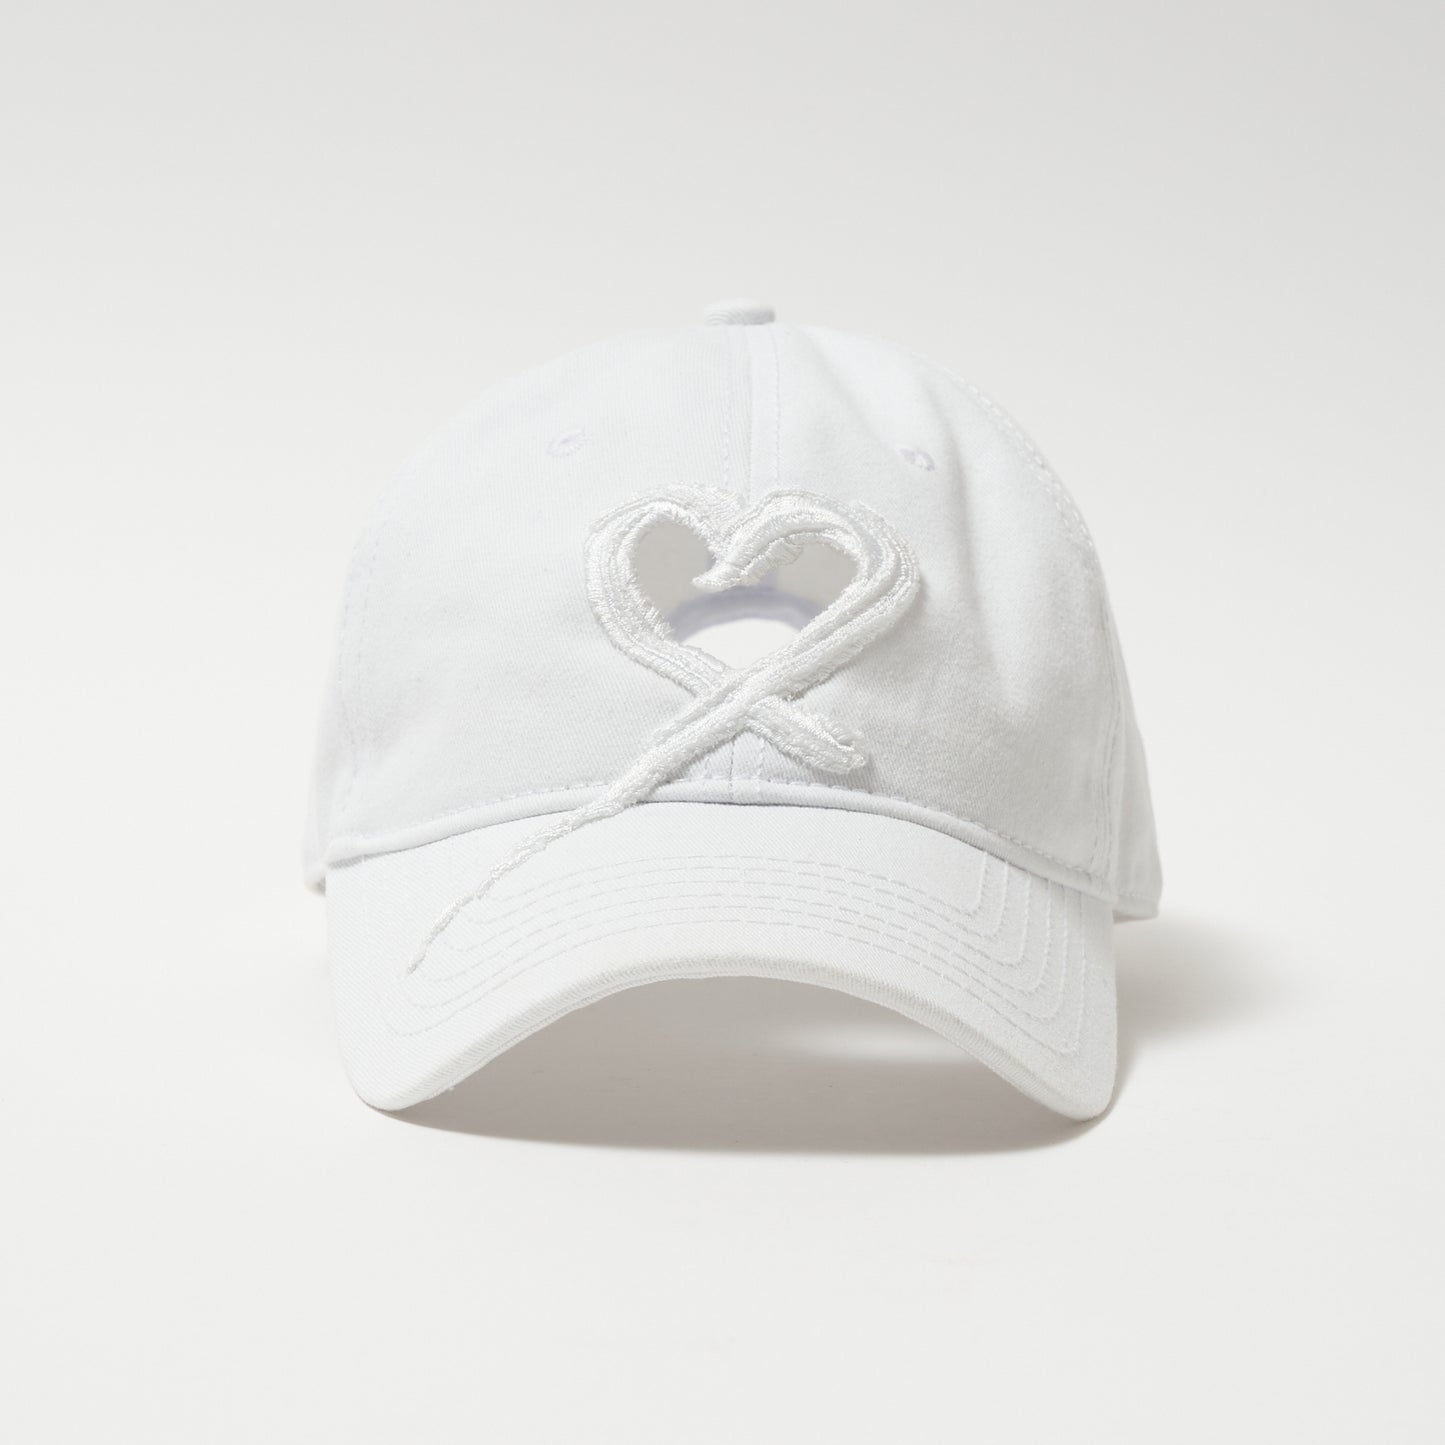 Heart whipped cream cap【Delivery in November 2023】